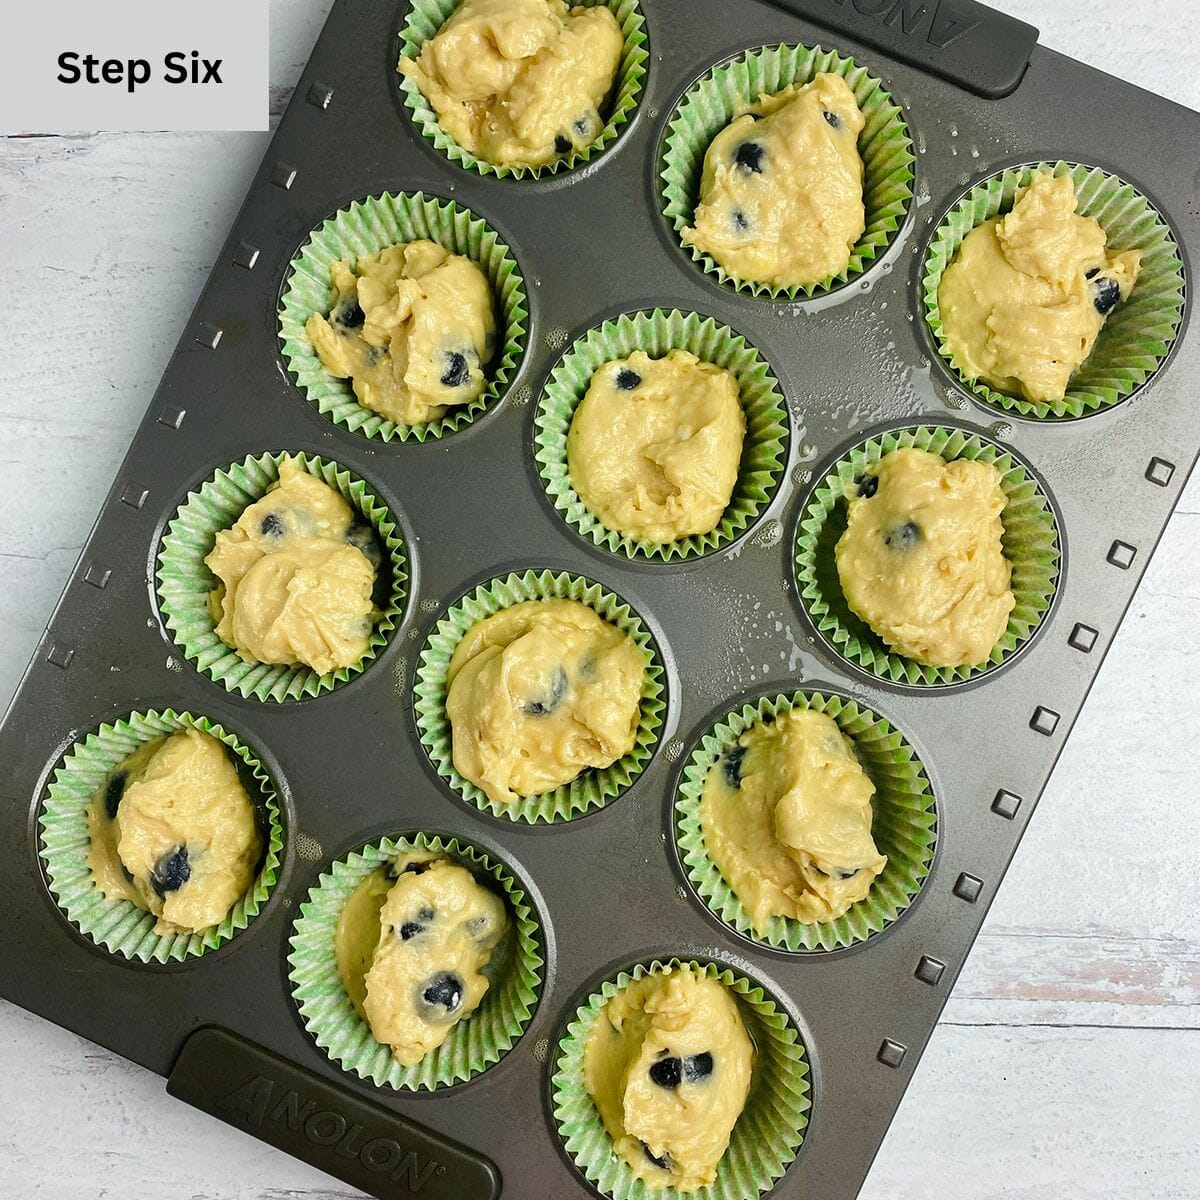 Maple blueberry muffin batter in a muffin tin ready for baking.